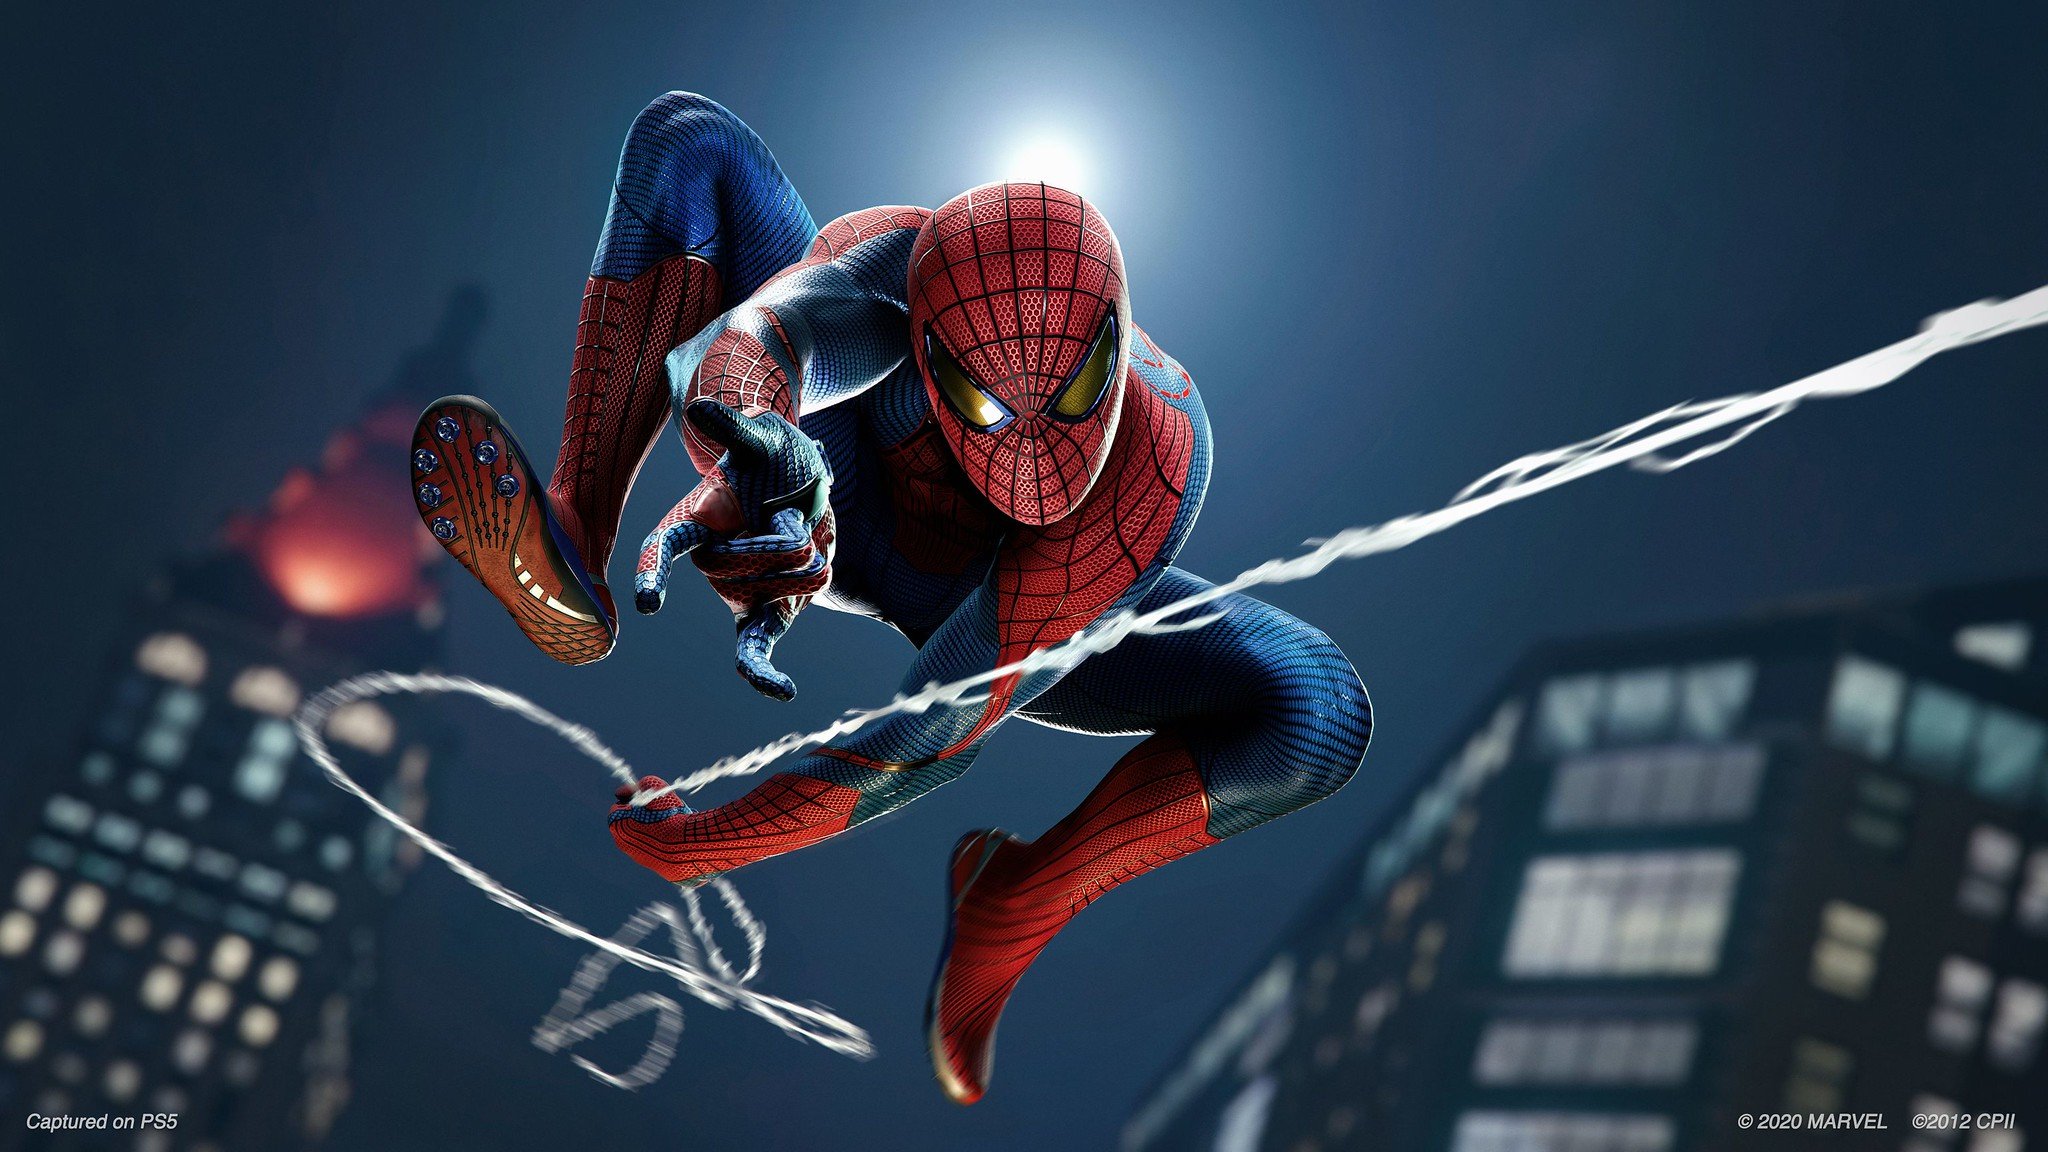 Spider-Man Remastered On PS5 Is Finally Being Sold Stand-Alone